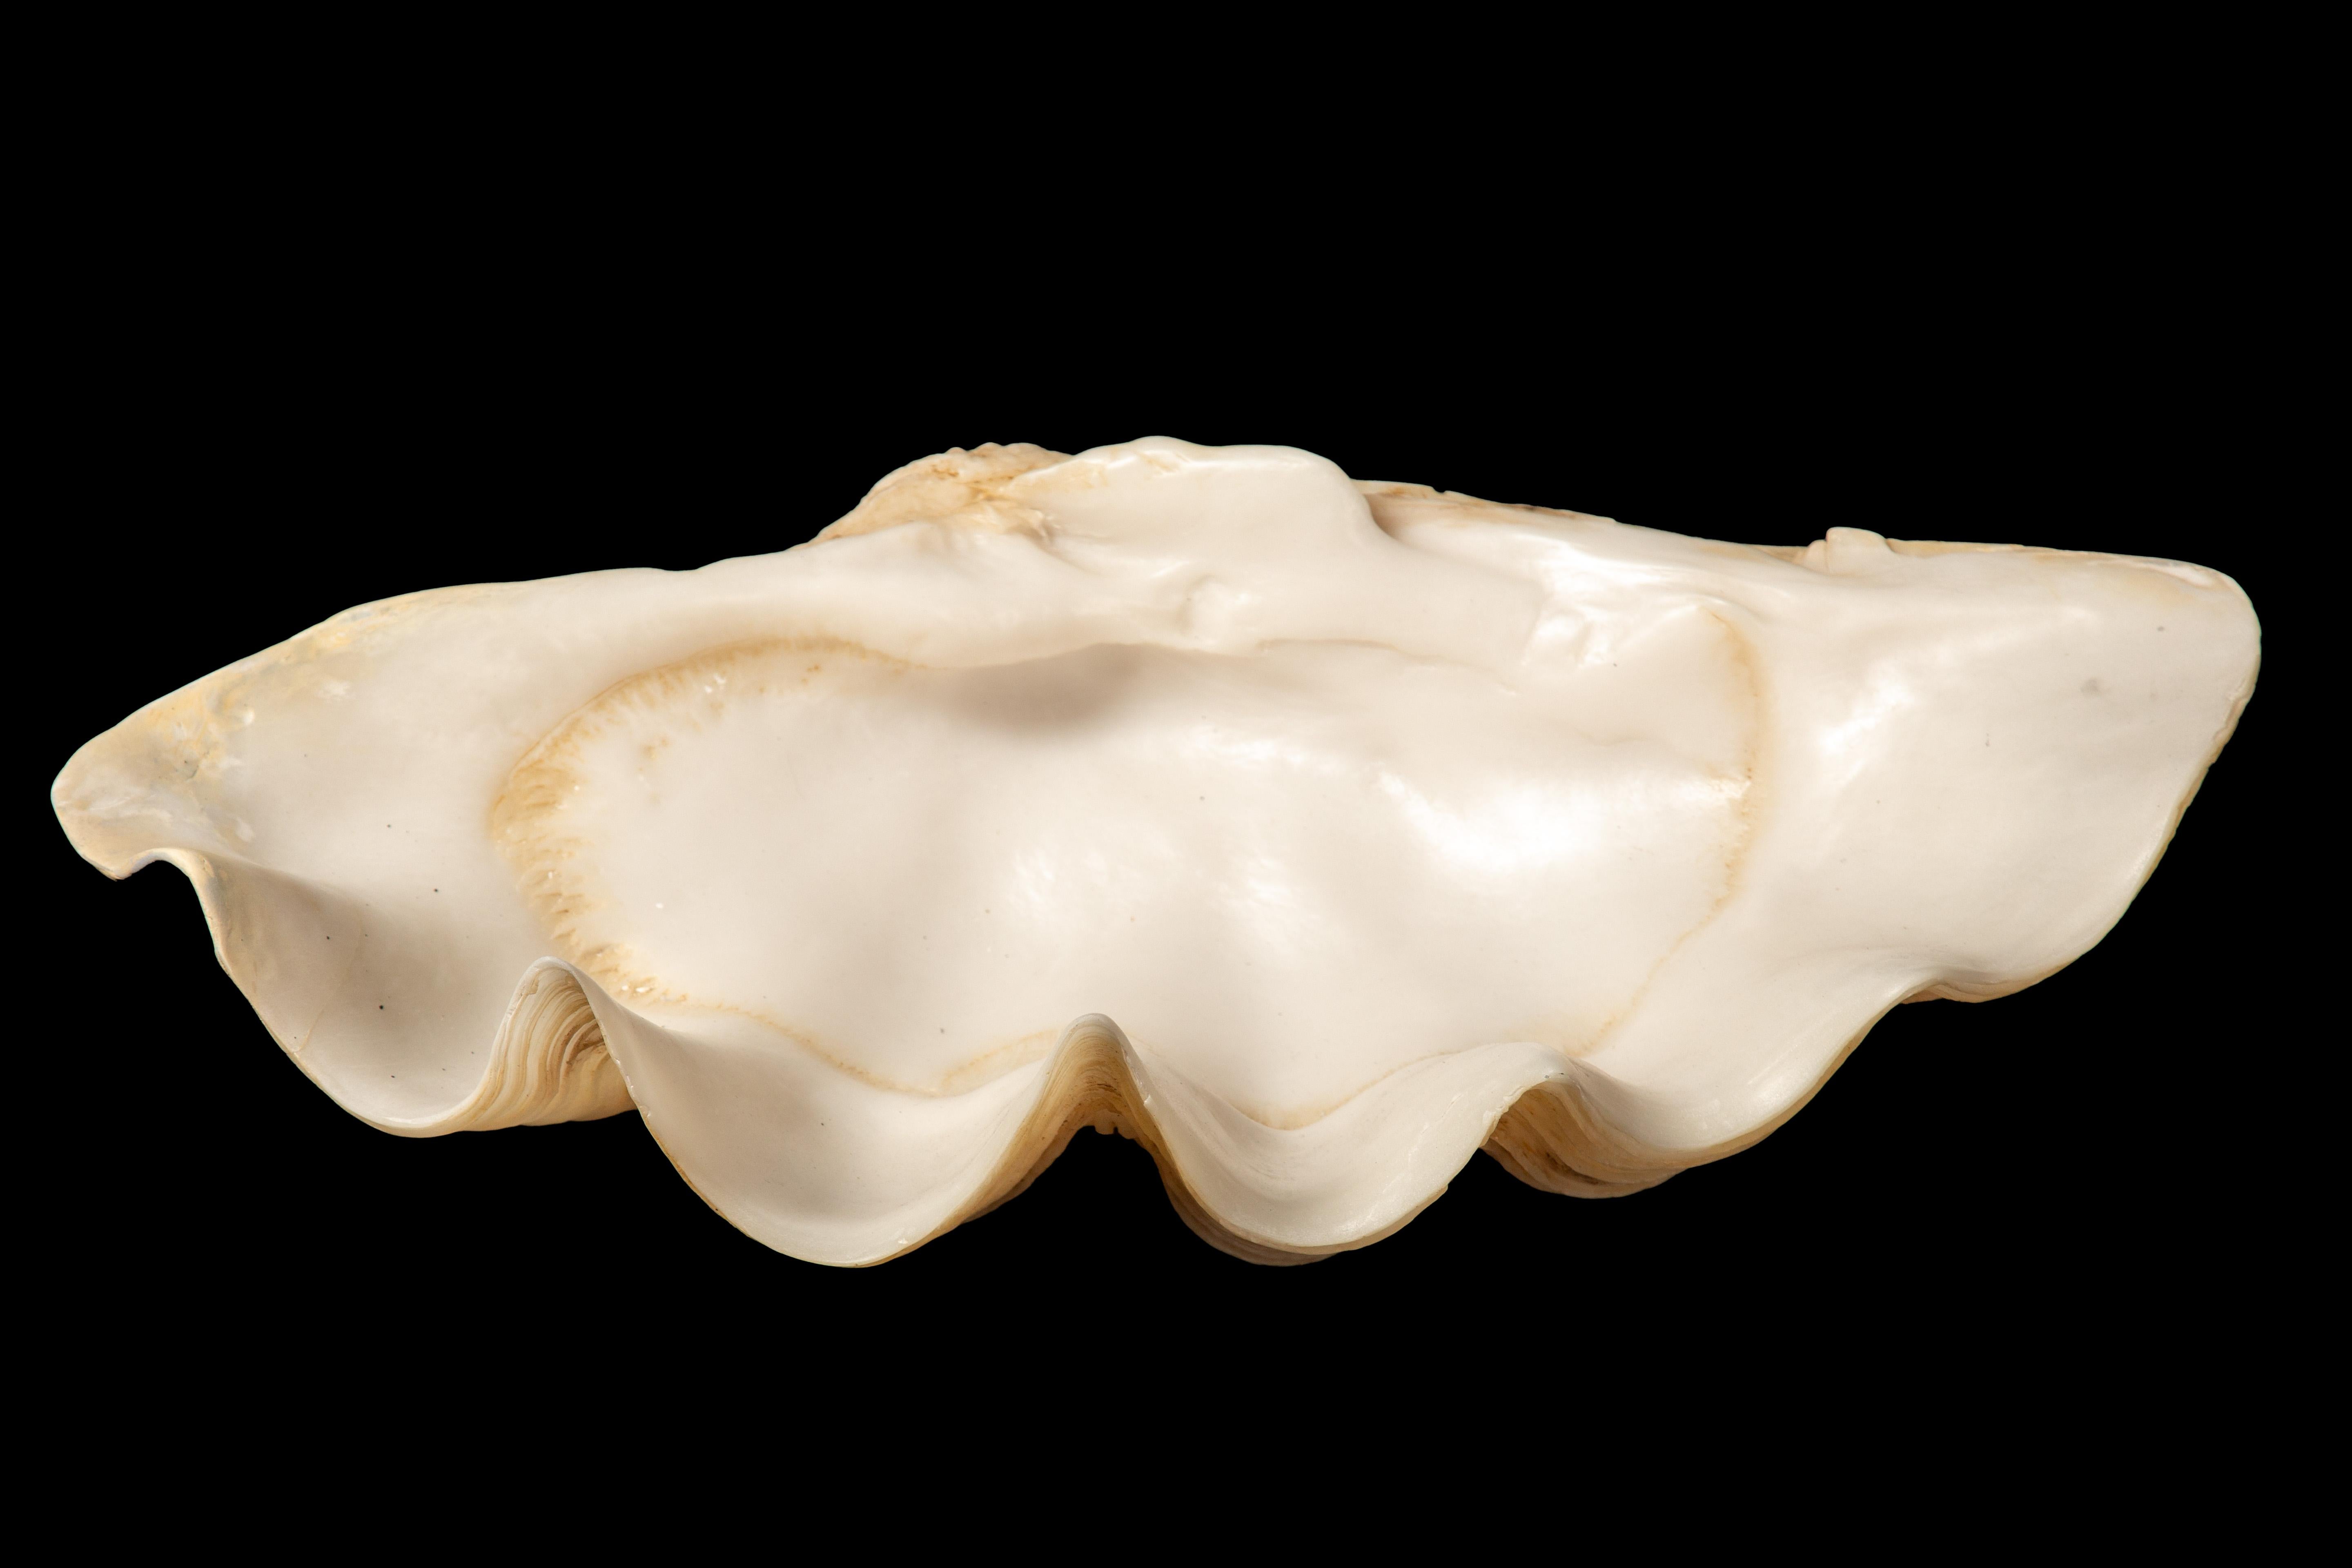 Exquisite and remarkably lifelike giant clam shell, crafted with the utmost precision from durable resin. This stunning piece not only captures the majestic beauty of a genuine clam shell but also exudes an aura of opulence and sophistication. Its